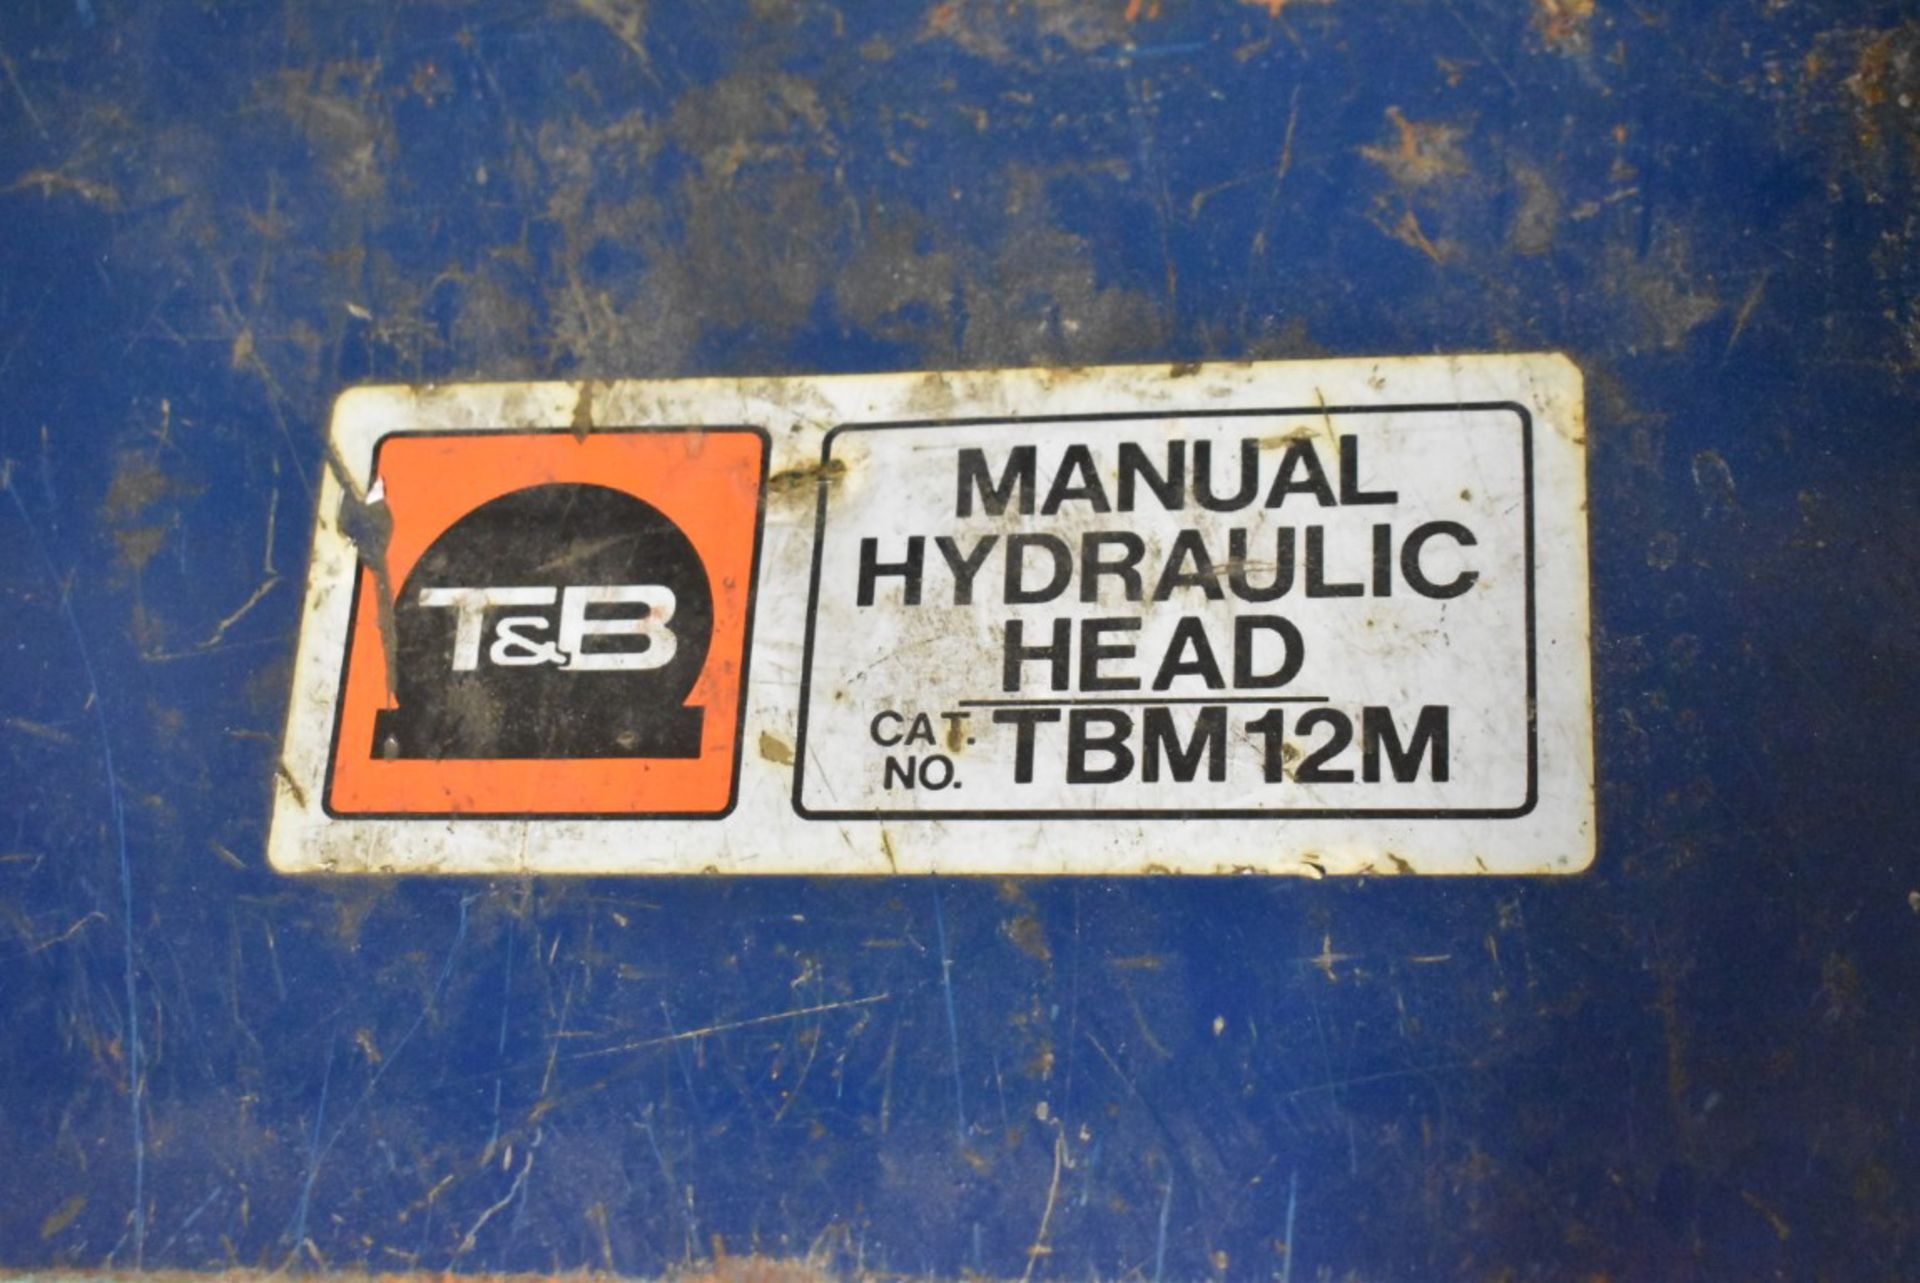 T&B TBM12M MANUAL HYDRAULIC CRIMPER [RIGGING FEES FOR LOT #2713 - $25 USD PLUS APPLICABLE TAXES] - Image 3 of 3